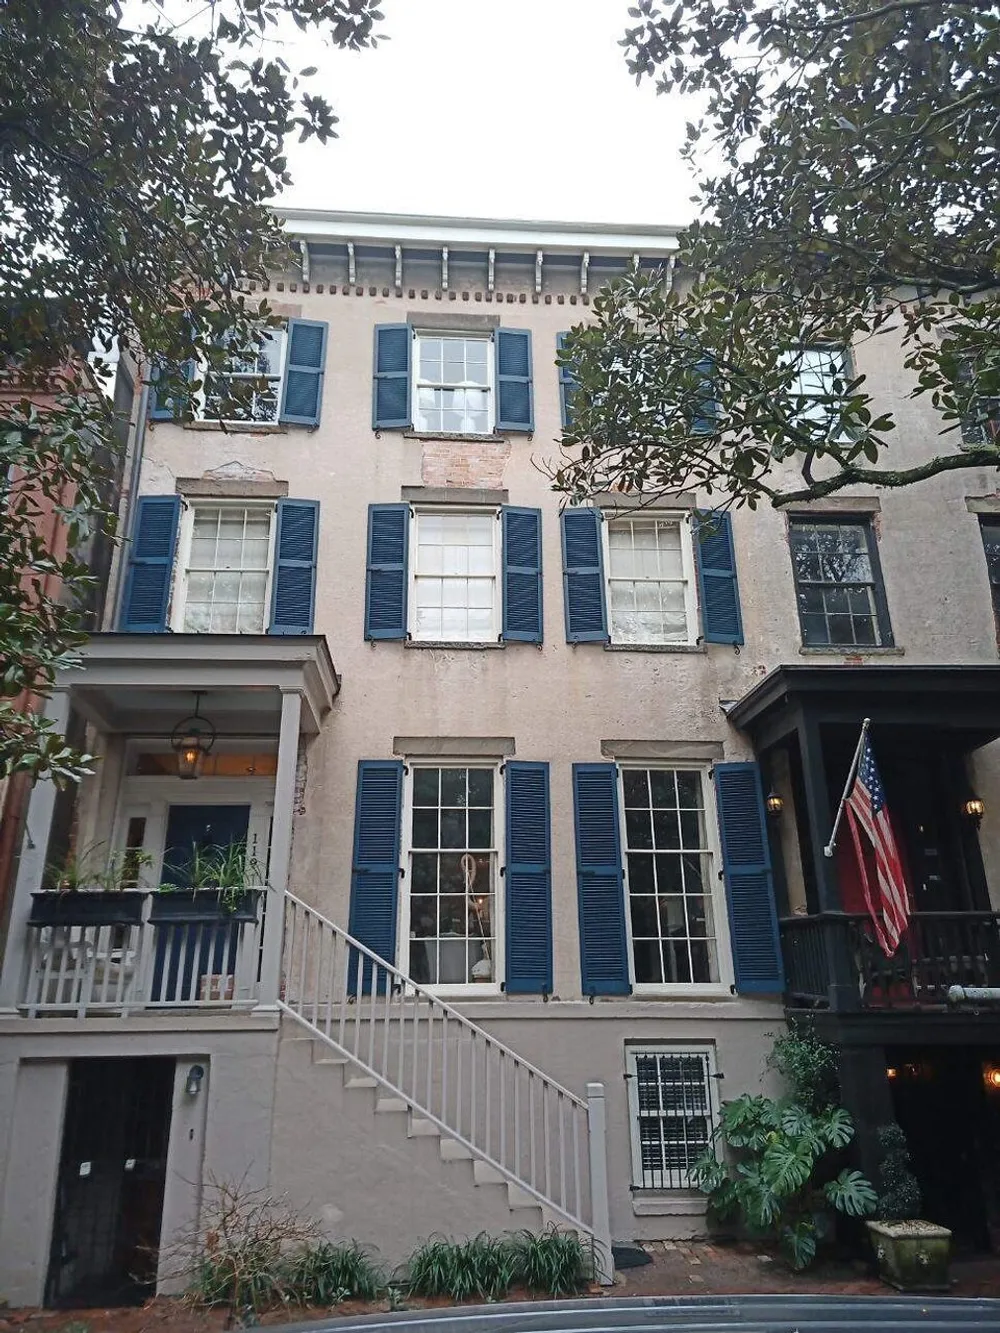 The image shows the facade of a charming three-story building with blue shutters an external staircase and a balcony adorned with an American flag